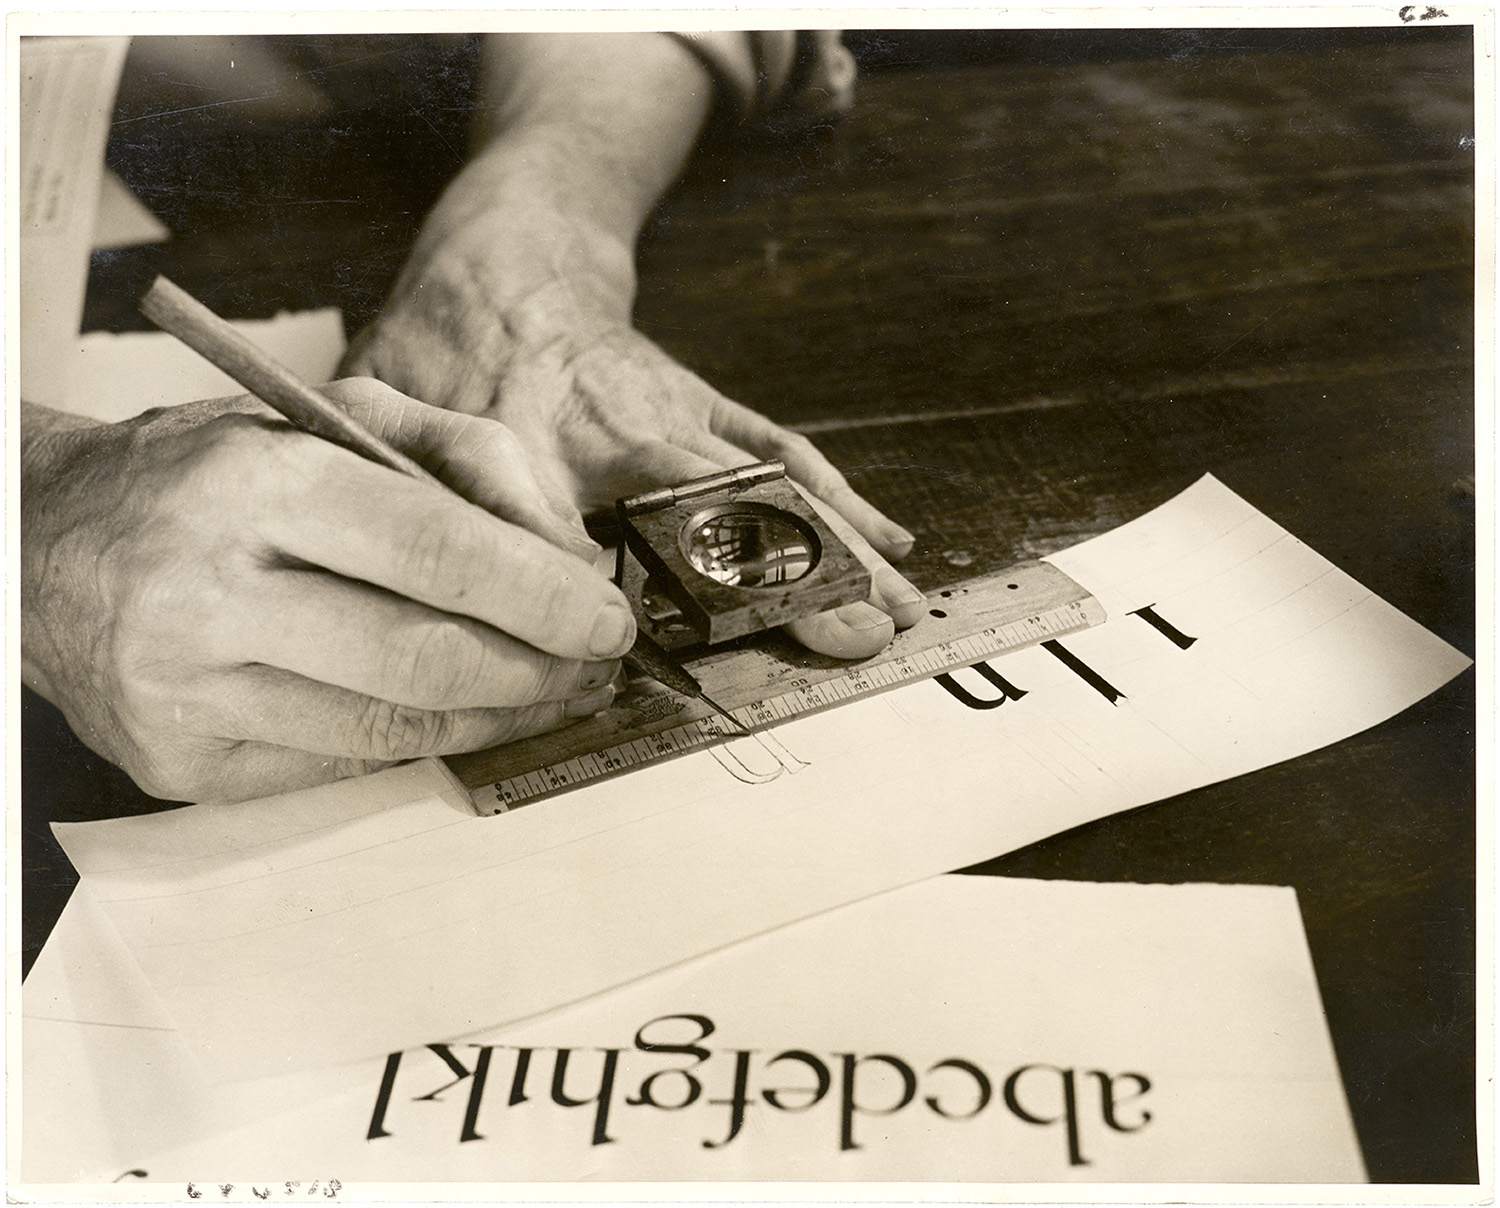 Dwiggins drawing letters using a loupe and a ruler